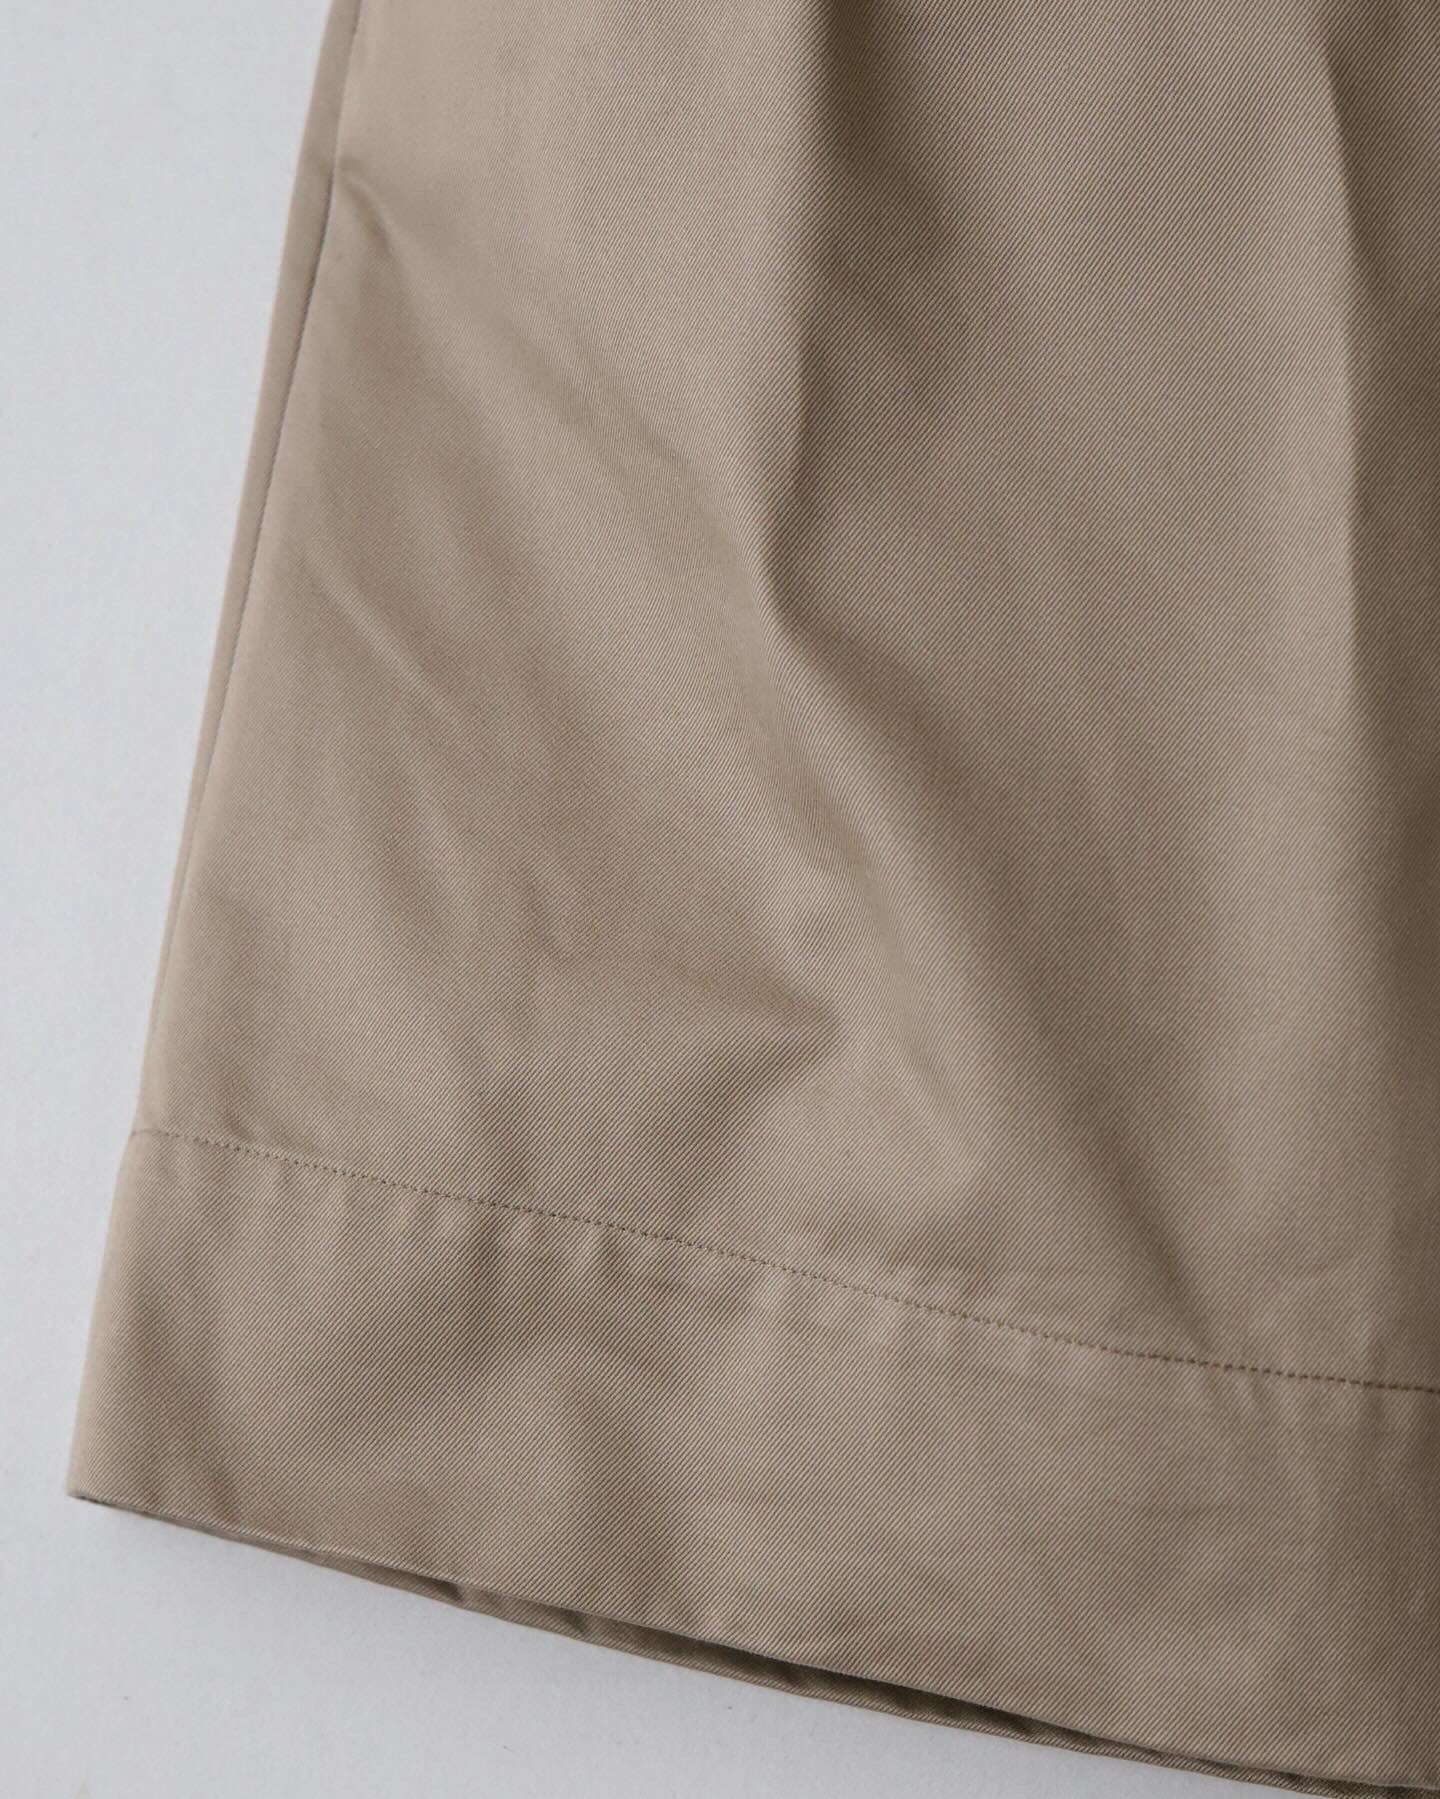 UNLIKELY SAWTOOTH FLAP 2P SHORTS TWILL